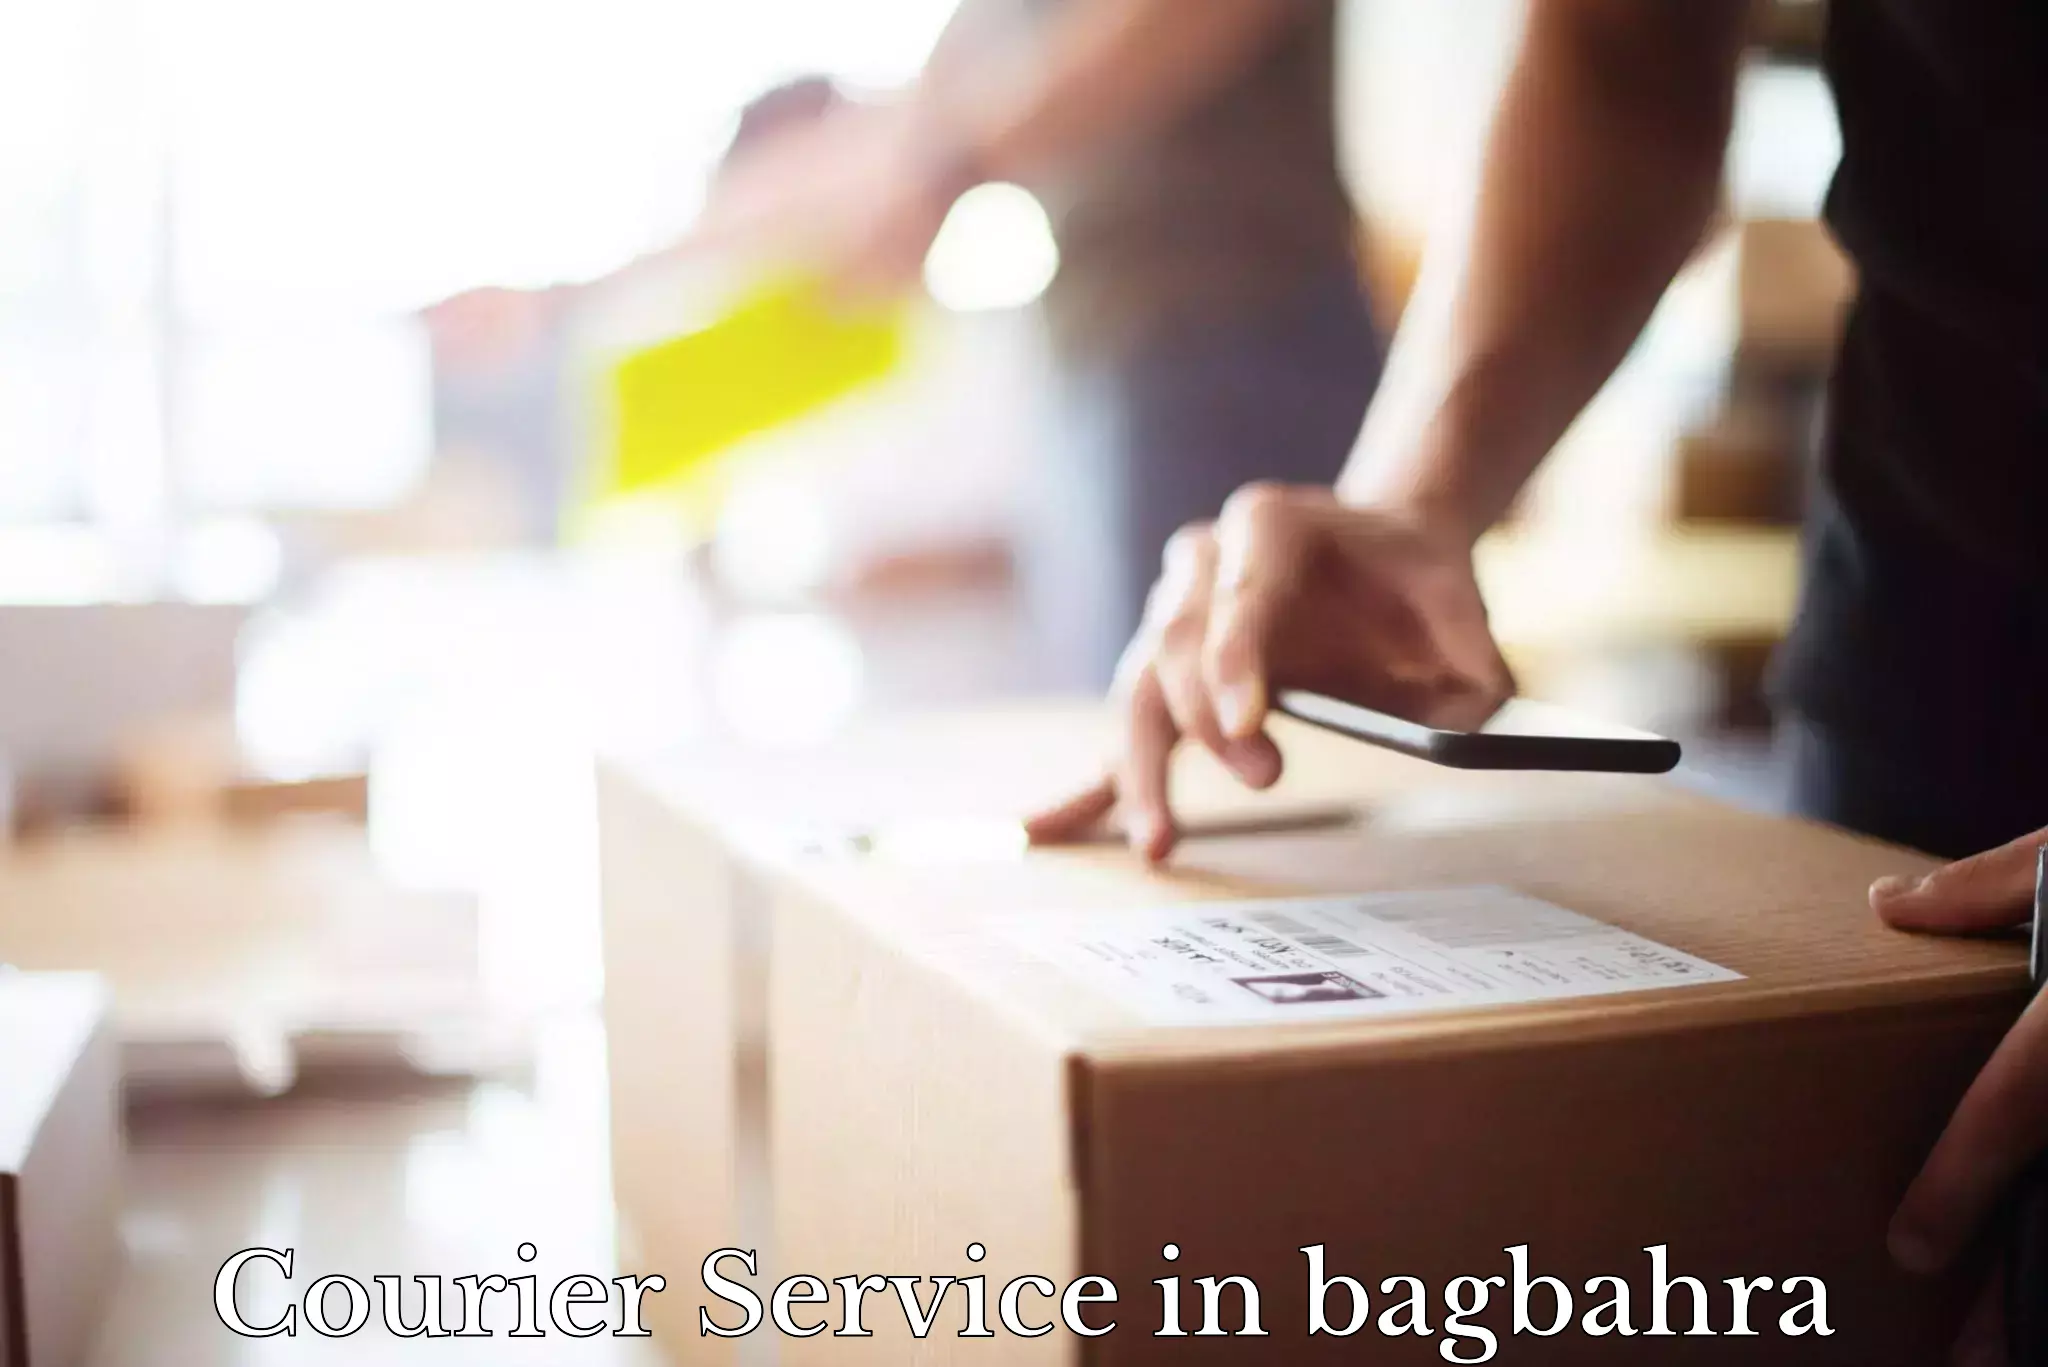 Next-day delivery options in bagbahra